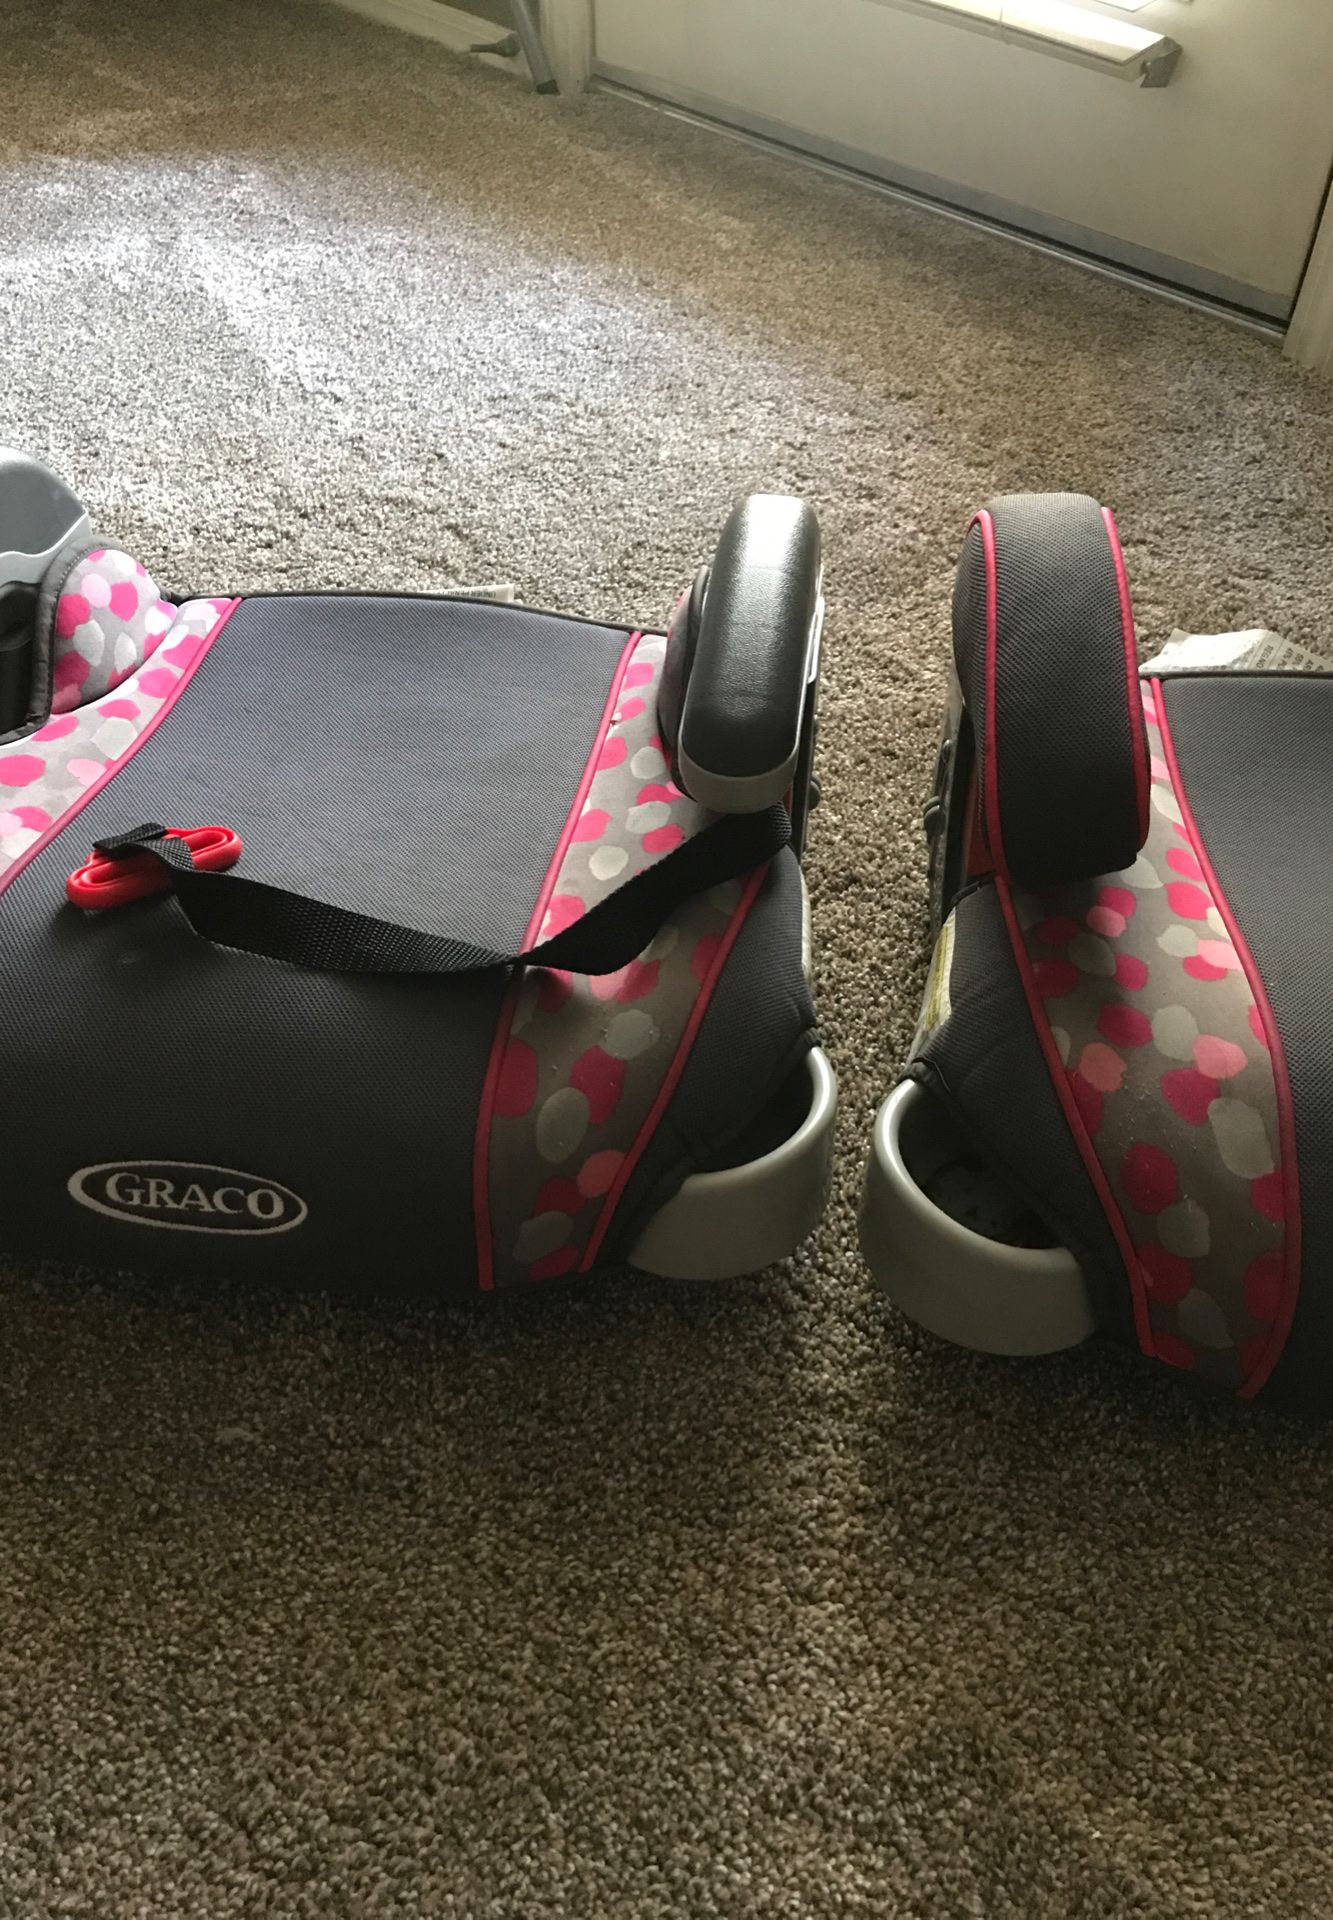 2 Graco booster seats in good condition